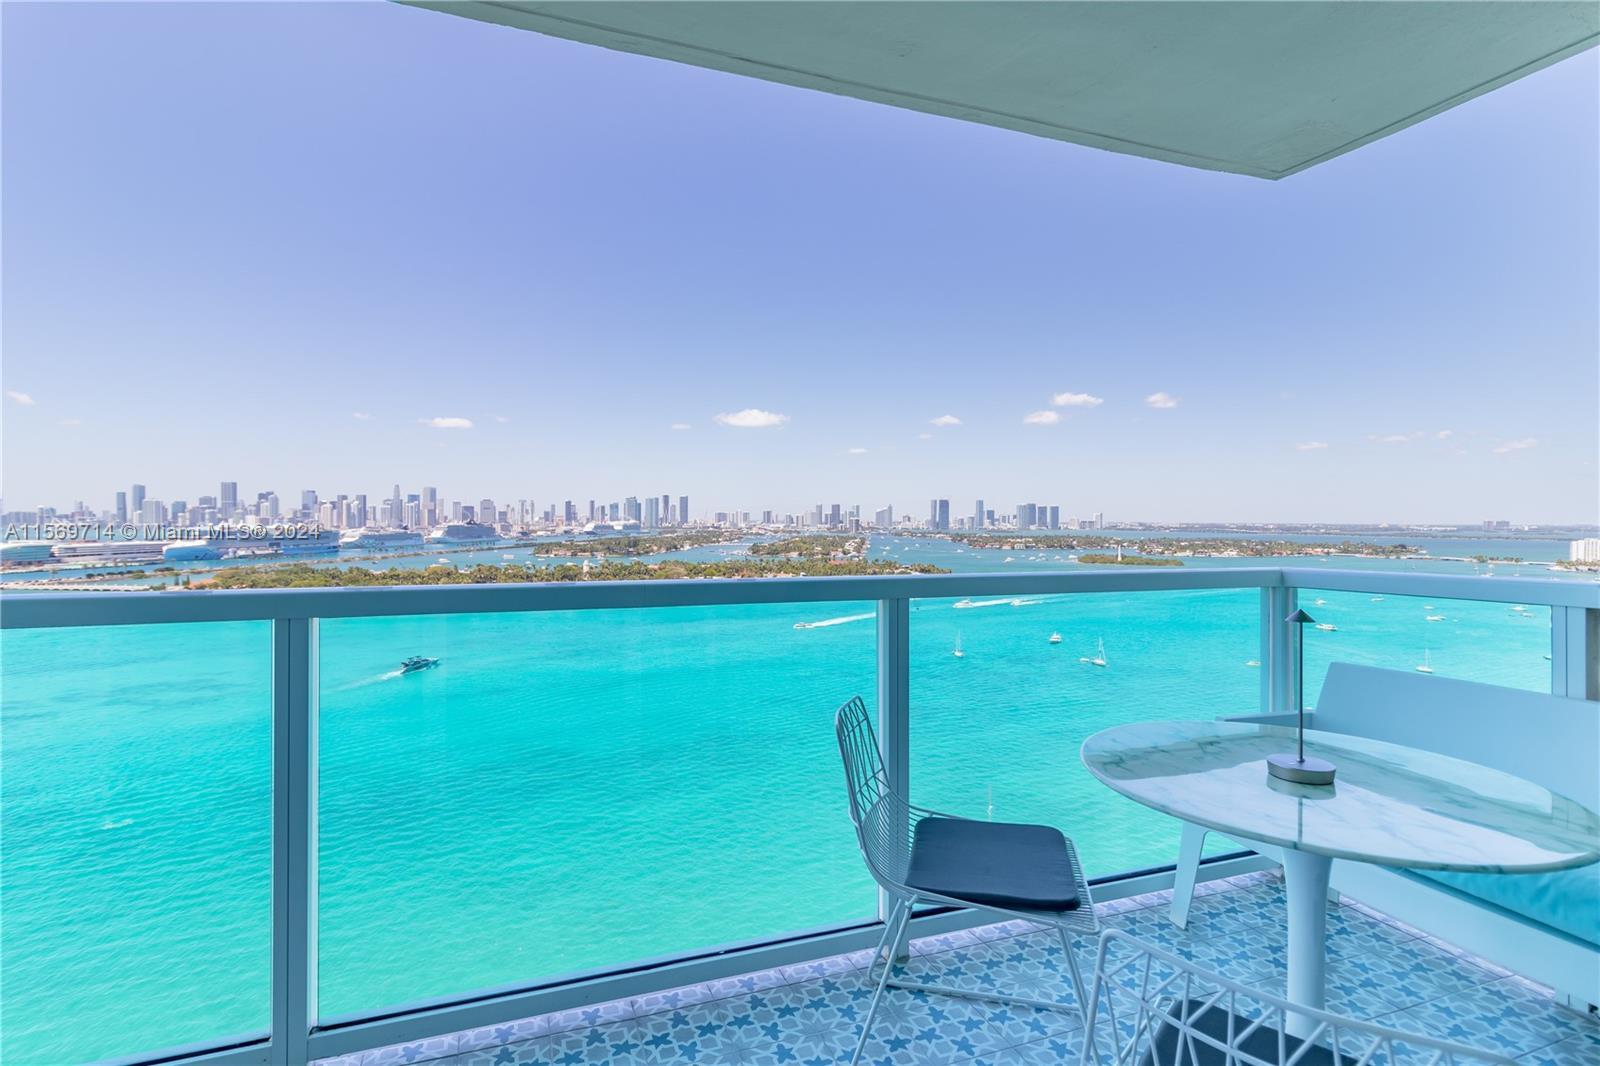 Incredible views from this high floor direct bayfront residence at The Floridian! Completely move in